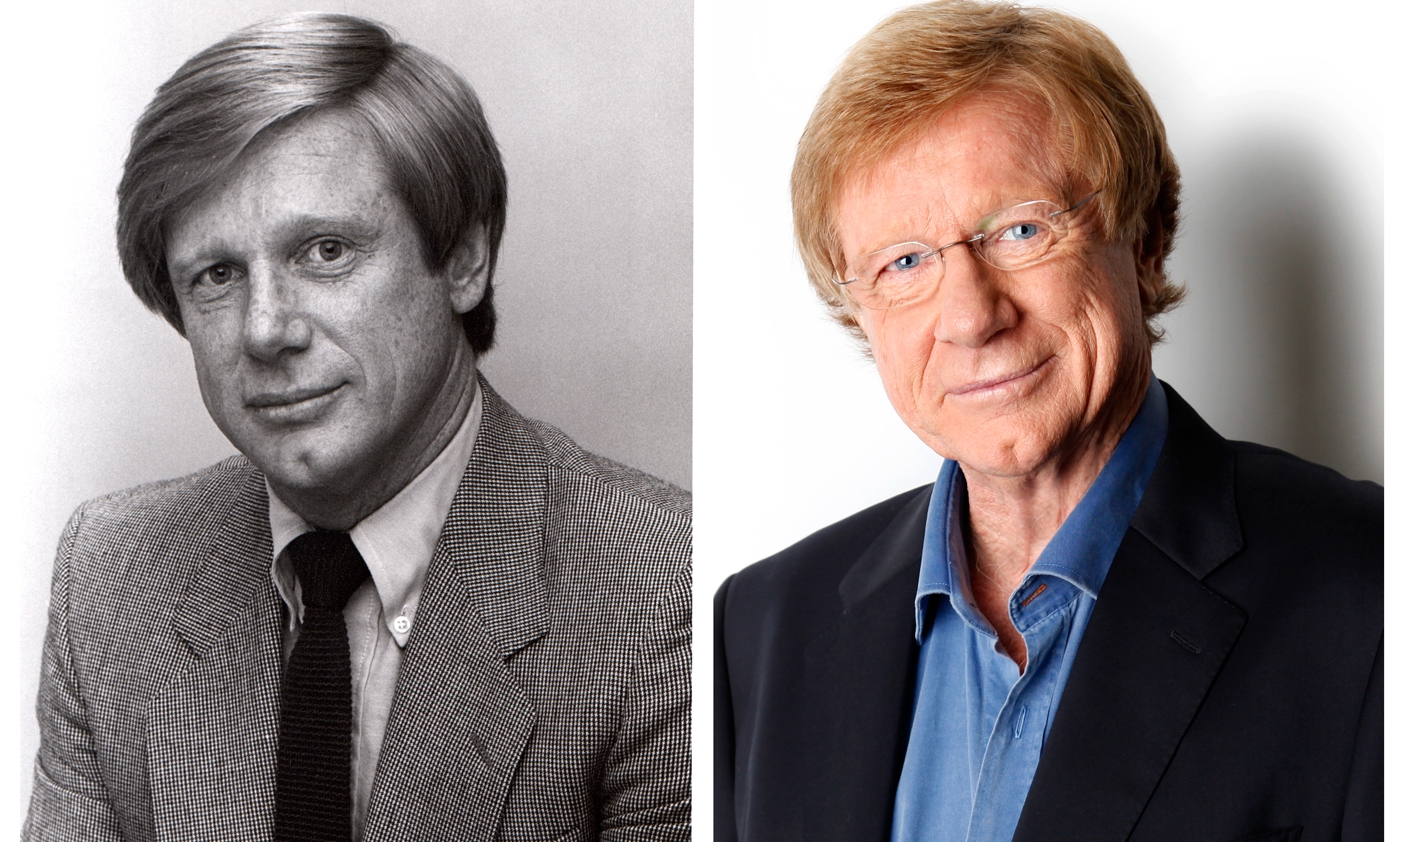   Then and Now - Kerry O'Brien  image - supplied/ABC 